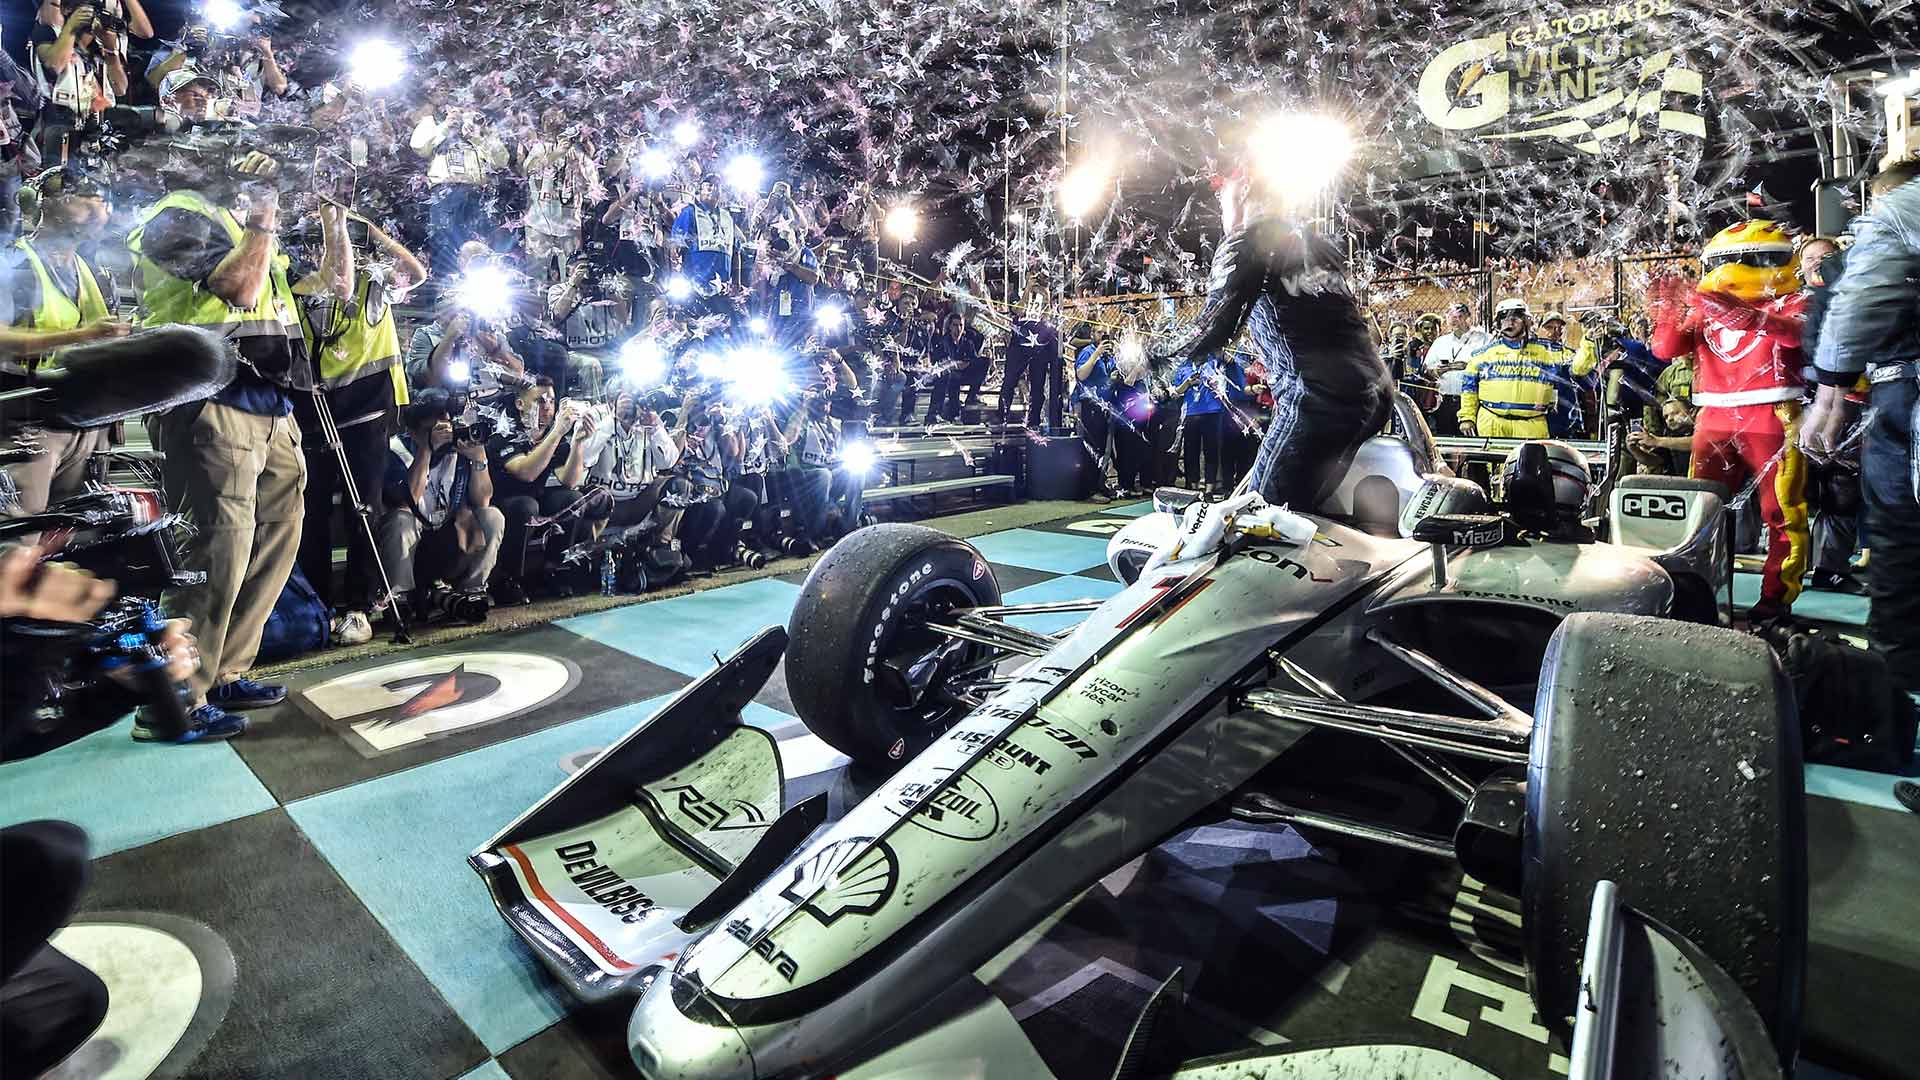 Cameras flashing and confetti flying as Josef Newgarden exits his car in victory circle